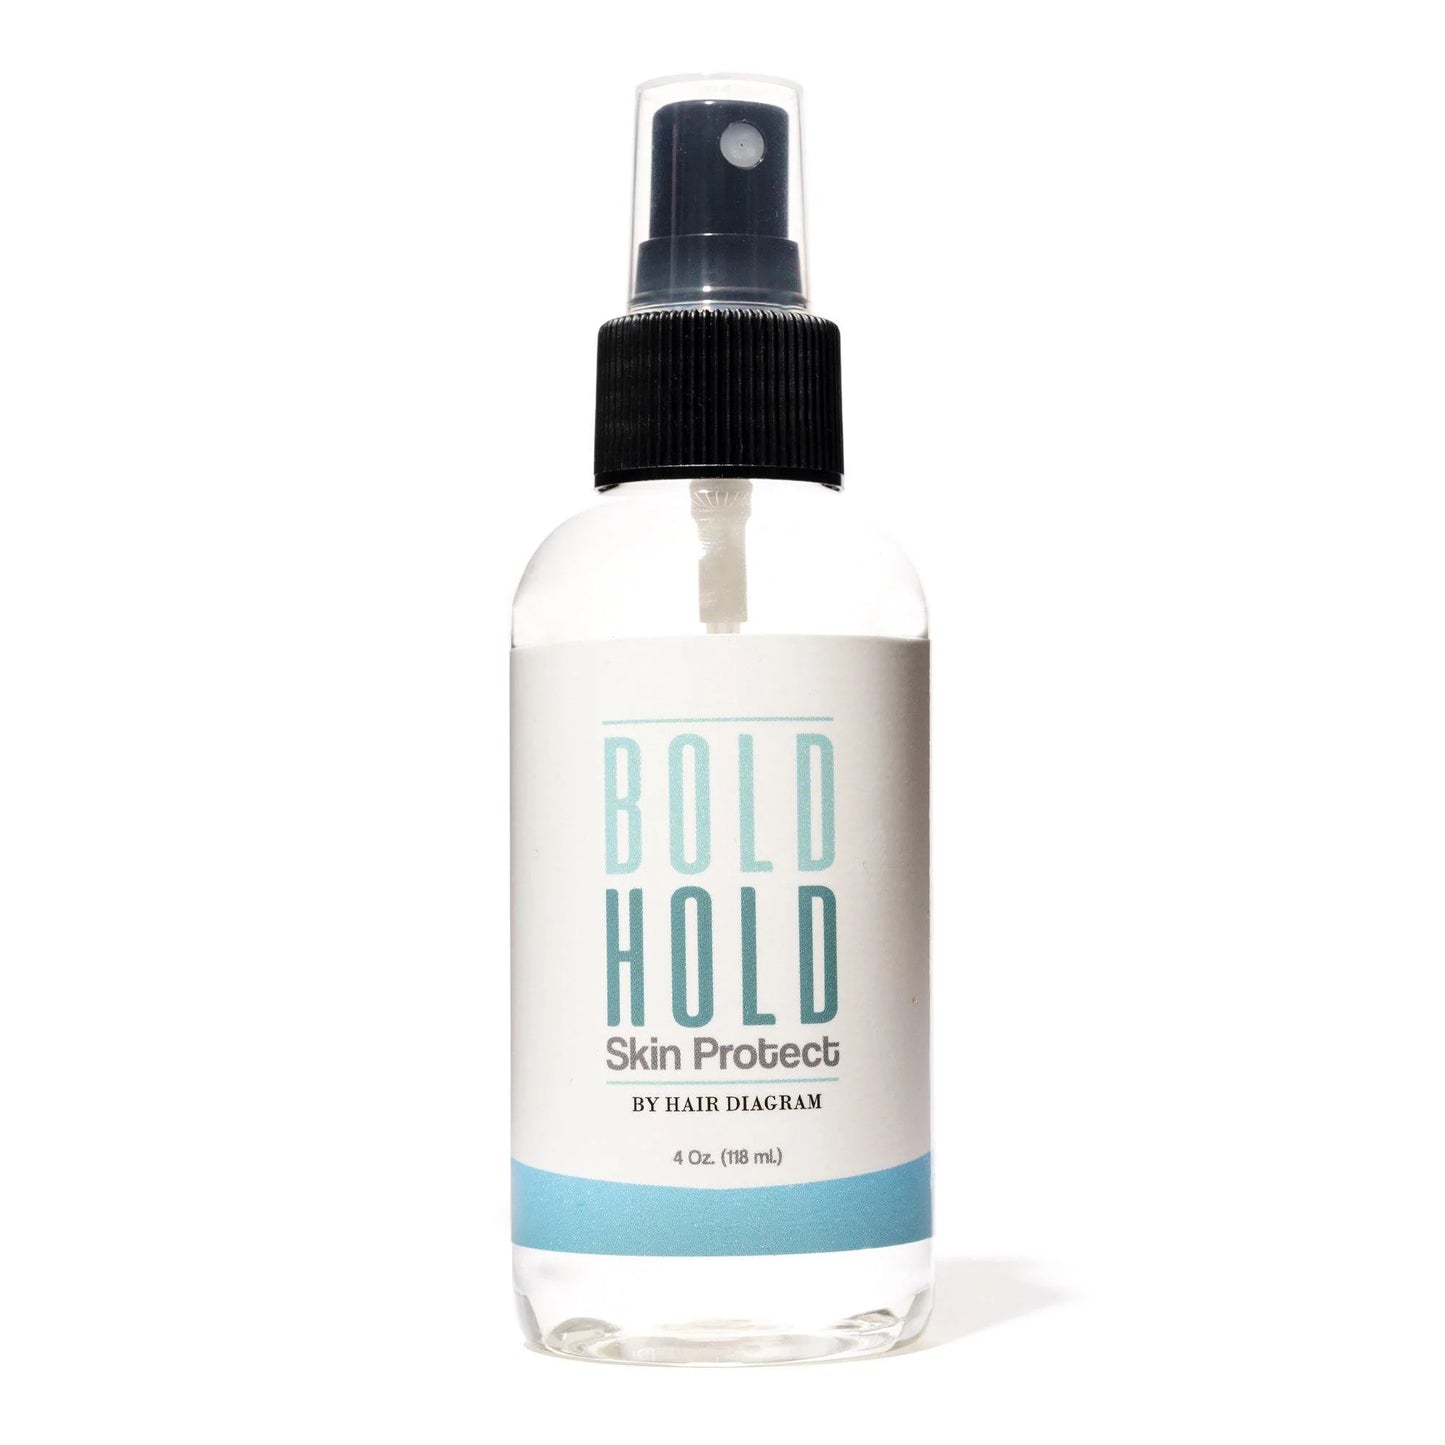 BOLD HOLD SKIN PROTECT